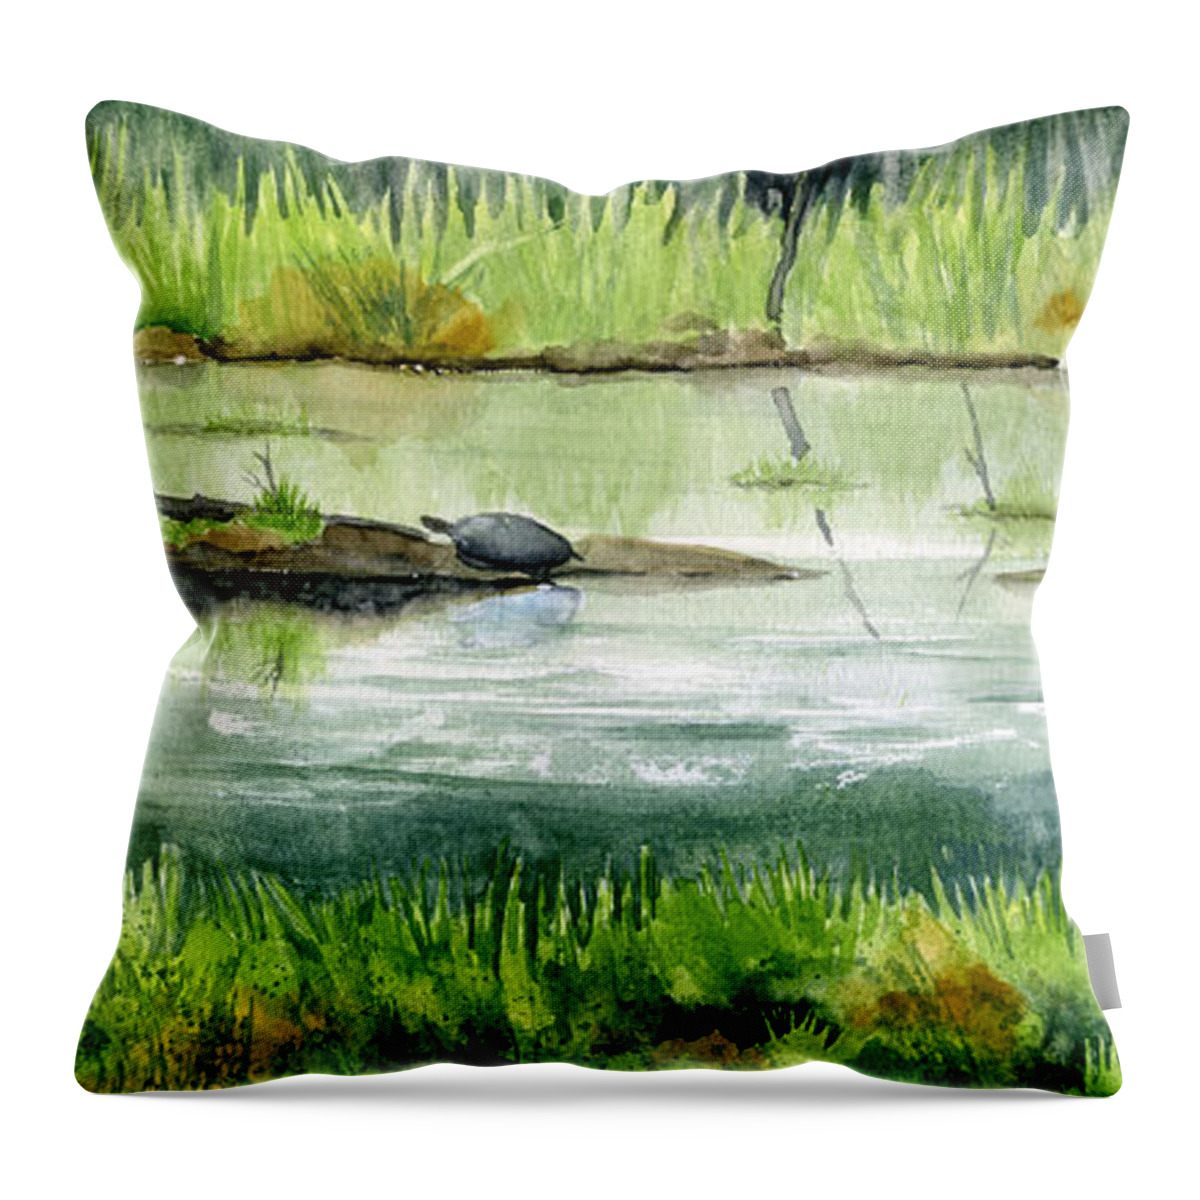 Turtle Throw Pillow featuring the painting Turtles by Mary Tuomi